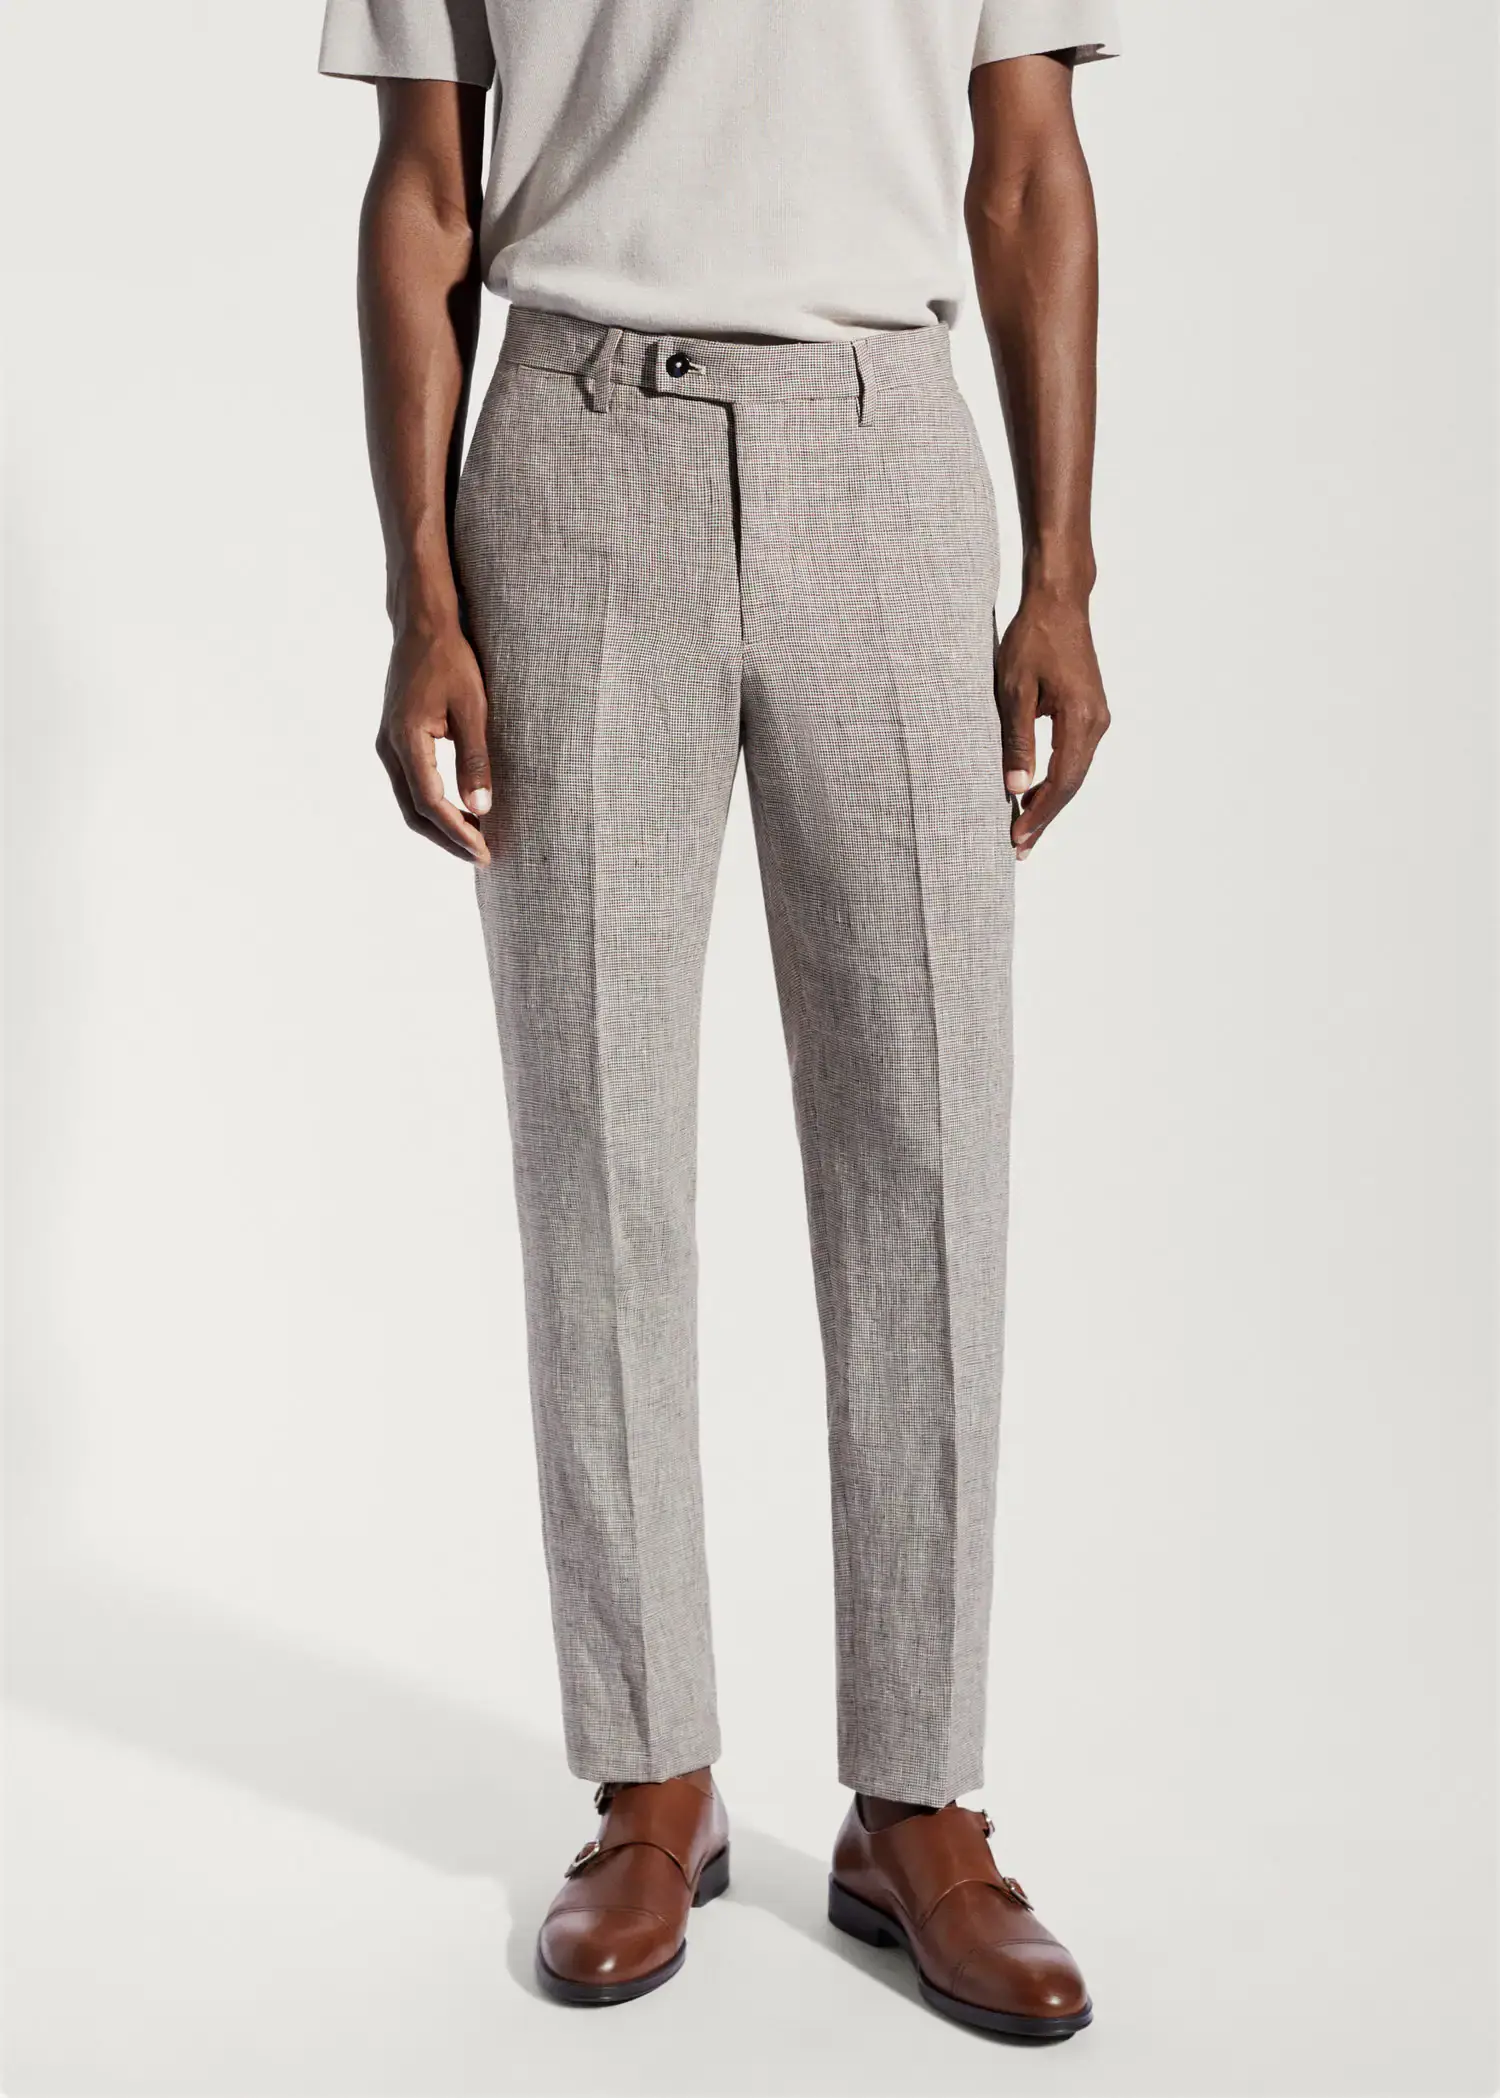 Mango 100% linen suit trousers. a person wearing a pair of gray pants. 